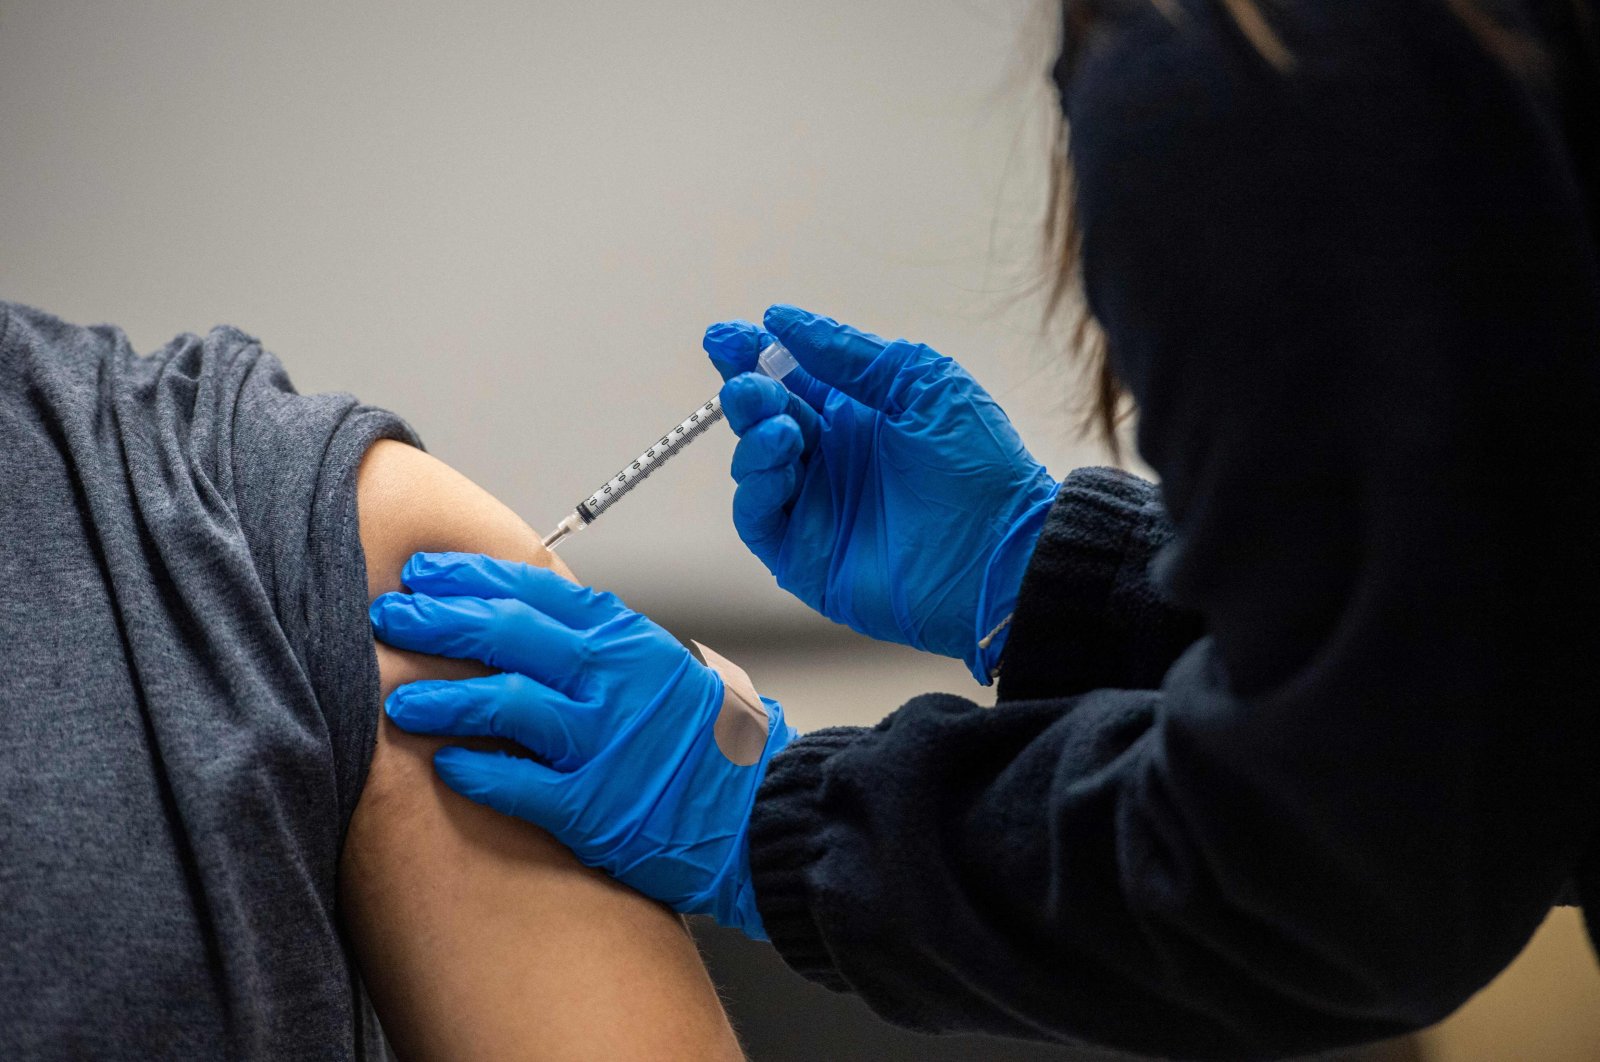 A man gets inoculated with the Pfizer-BioNTech COVID-19 vaccine at La Colaborativa in Chelsea, Massachusetts, U.S., Feb. 16, 2021. (AFP Photo)